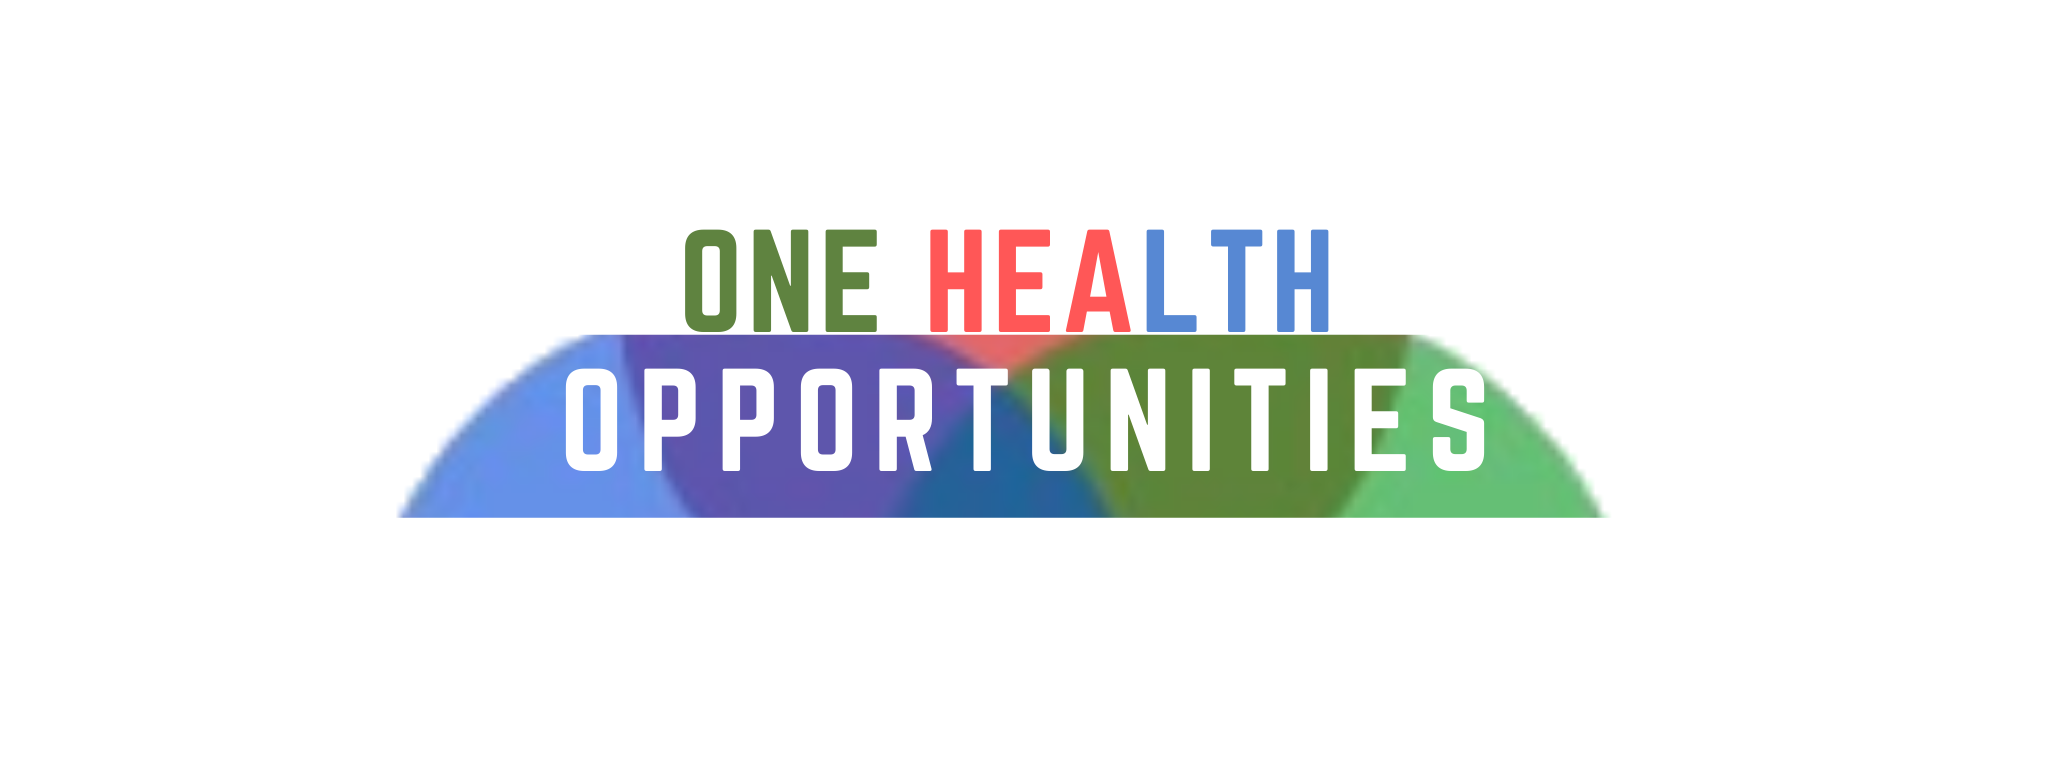 One Health Opportunities logo